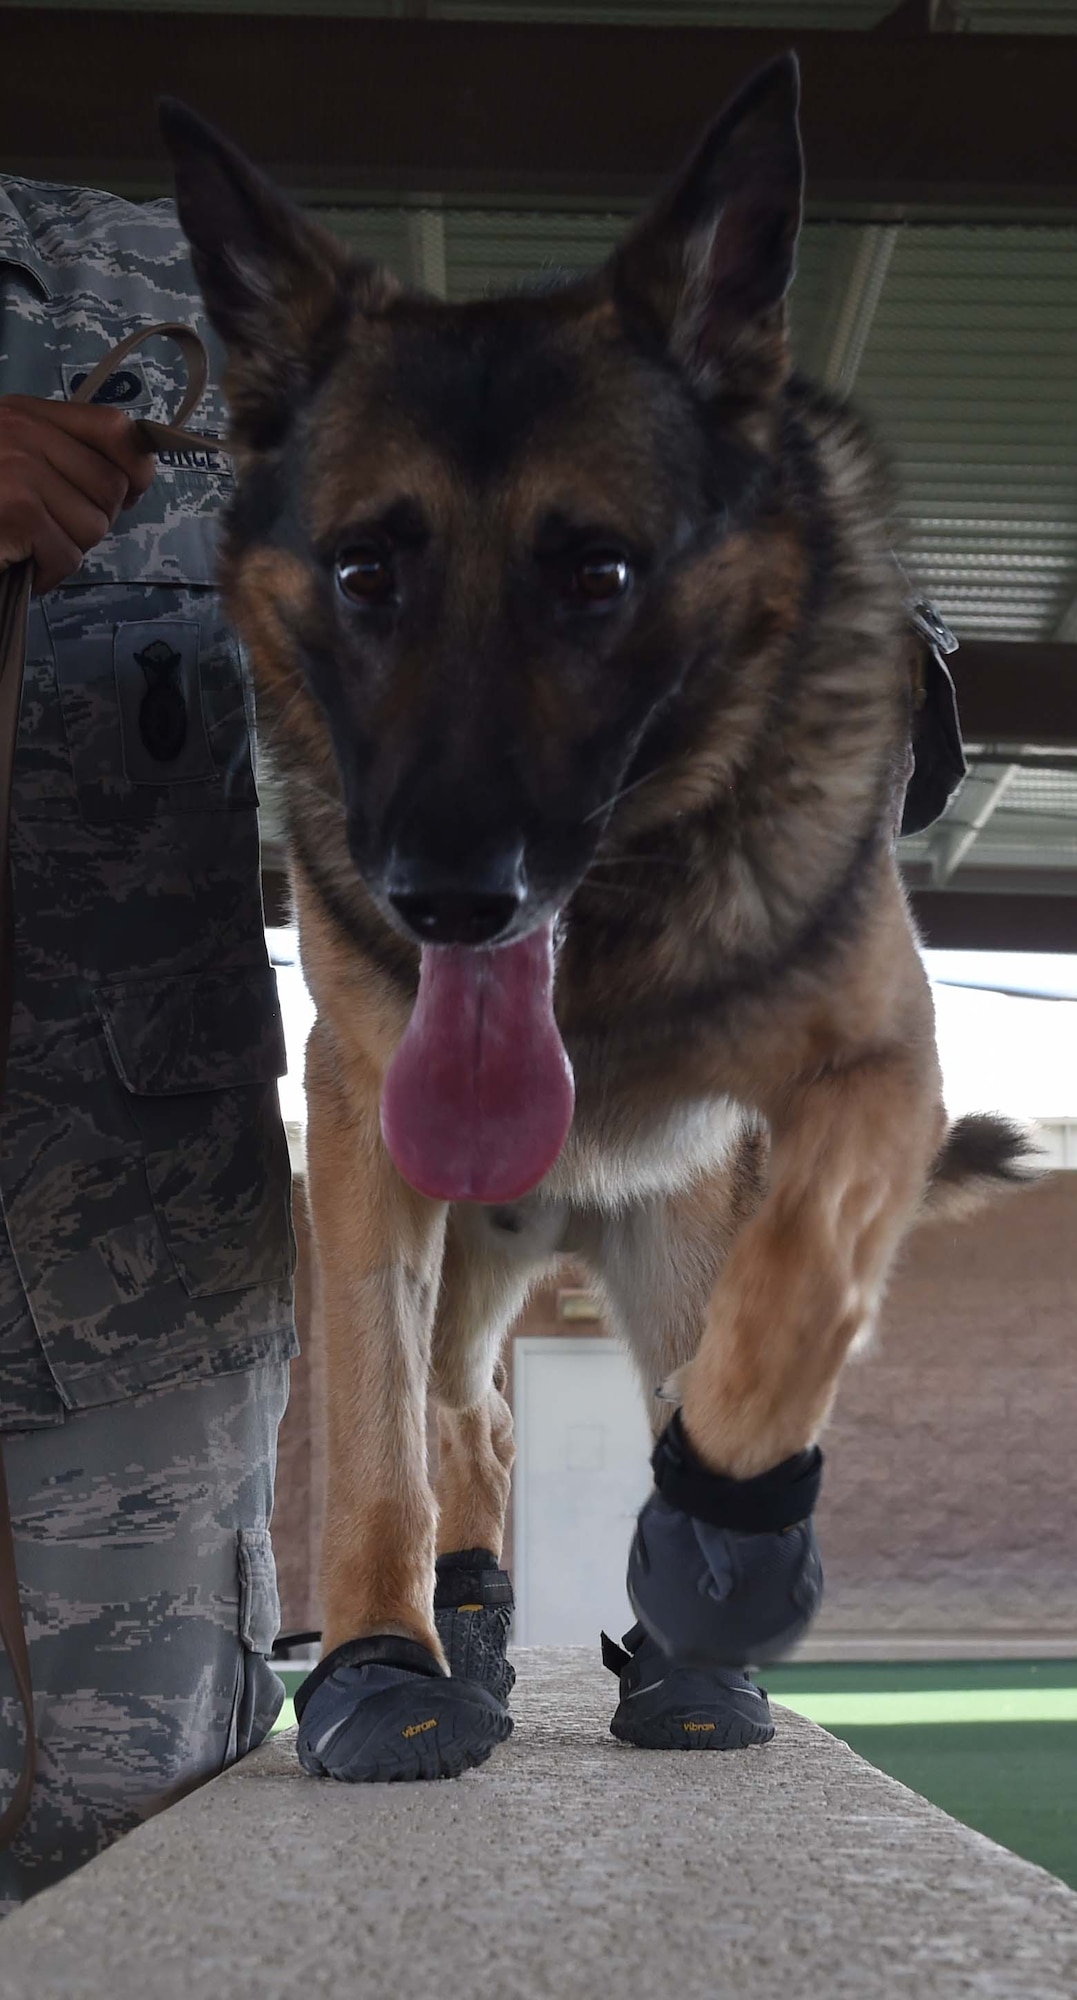 SSamuel 799th Security Forces Squadron, military working dog, goes through search procedures on Sept 1, 2017 at Creech Air Force Base, Nev. The dogs wear these booties for protect from rough terrain and inclement weather conditions. (U.S. Air Force photo by Airman 1st Class Adarius Petty)